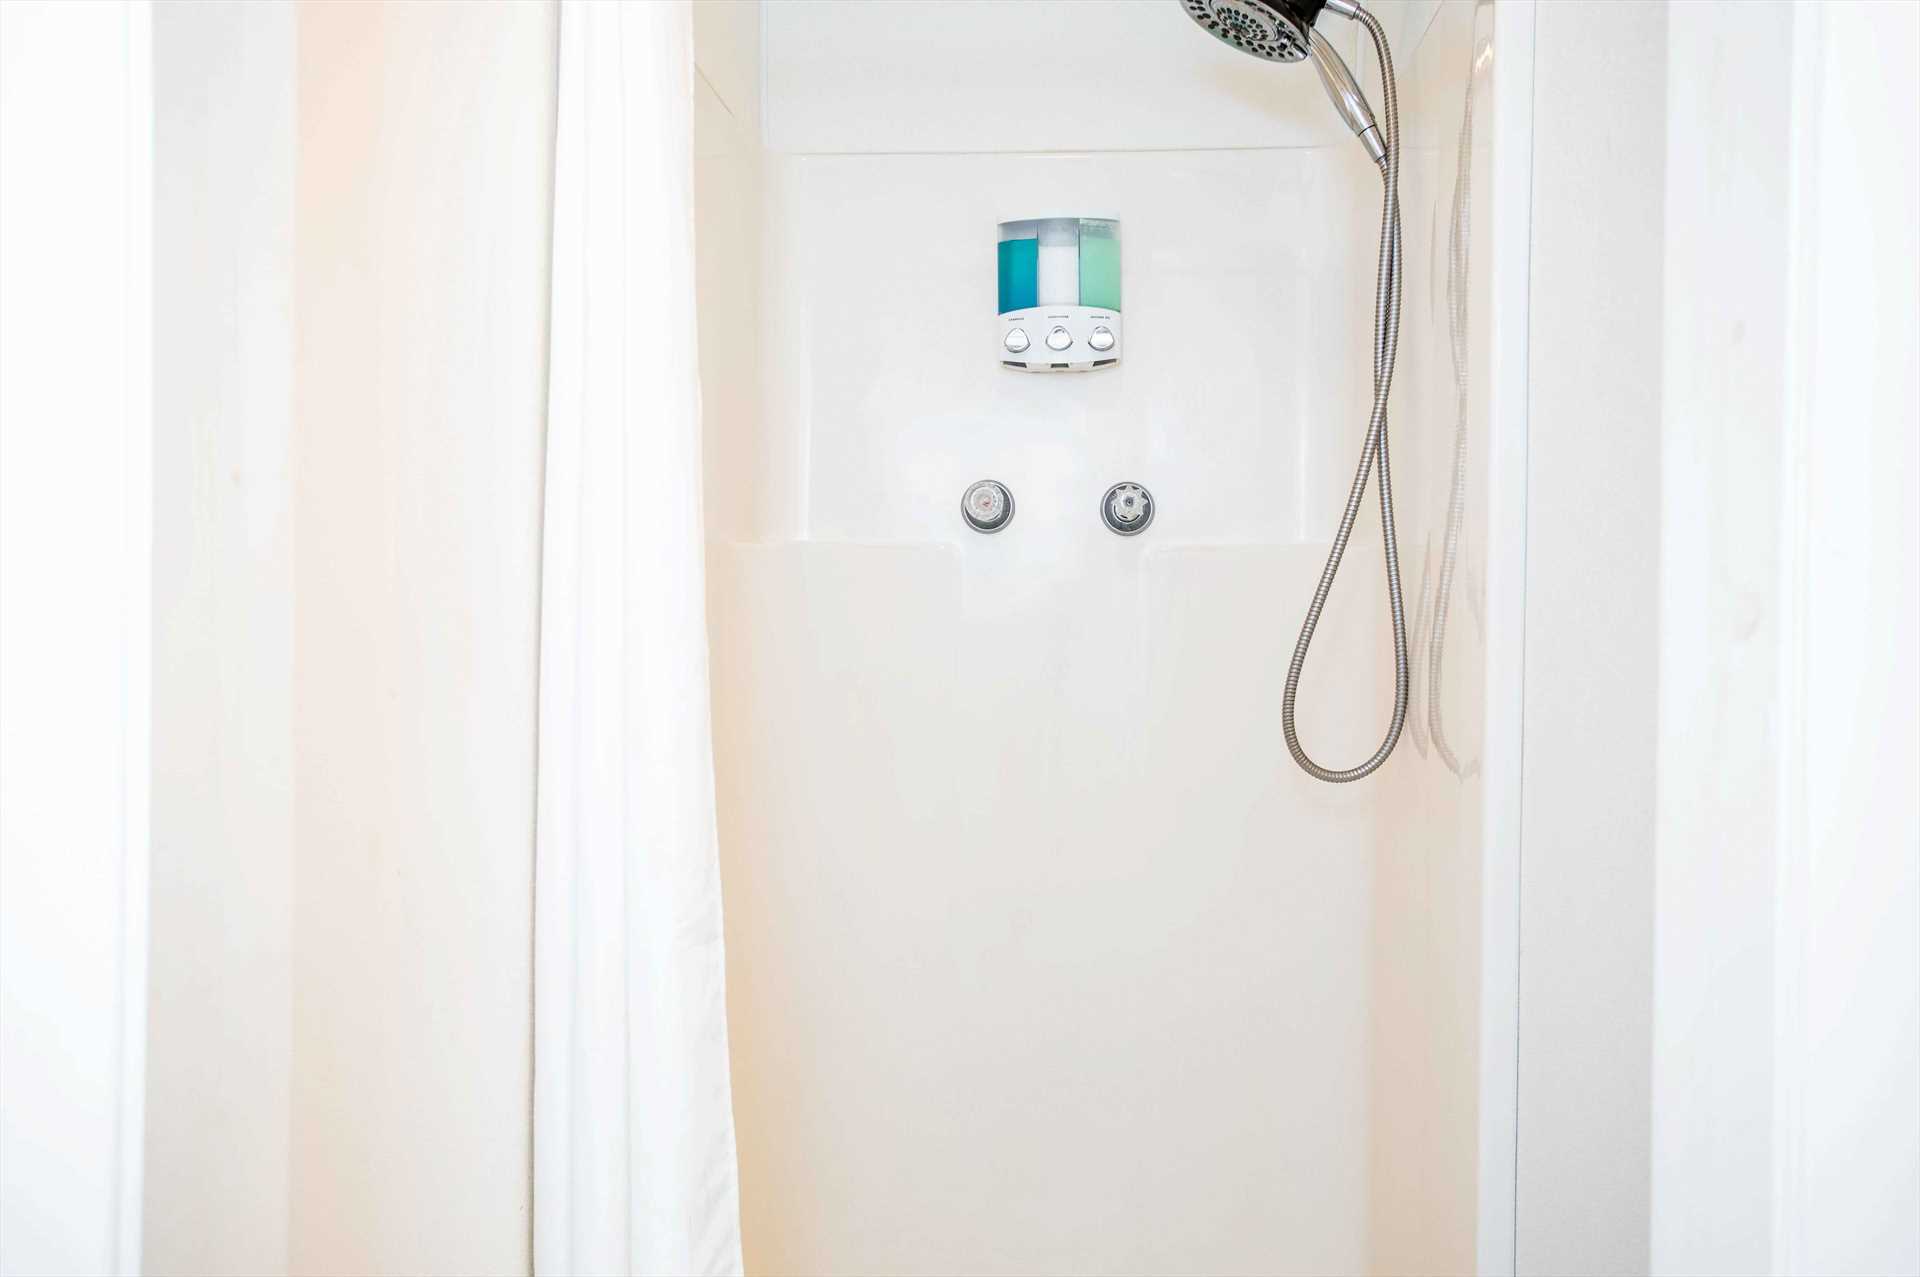                                                 Showers are installed in both bathrooms for convenient and easy cleanup!